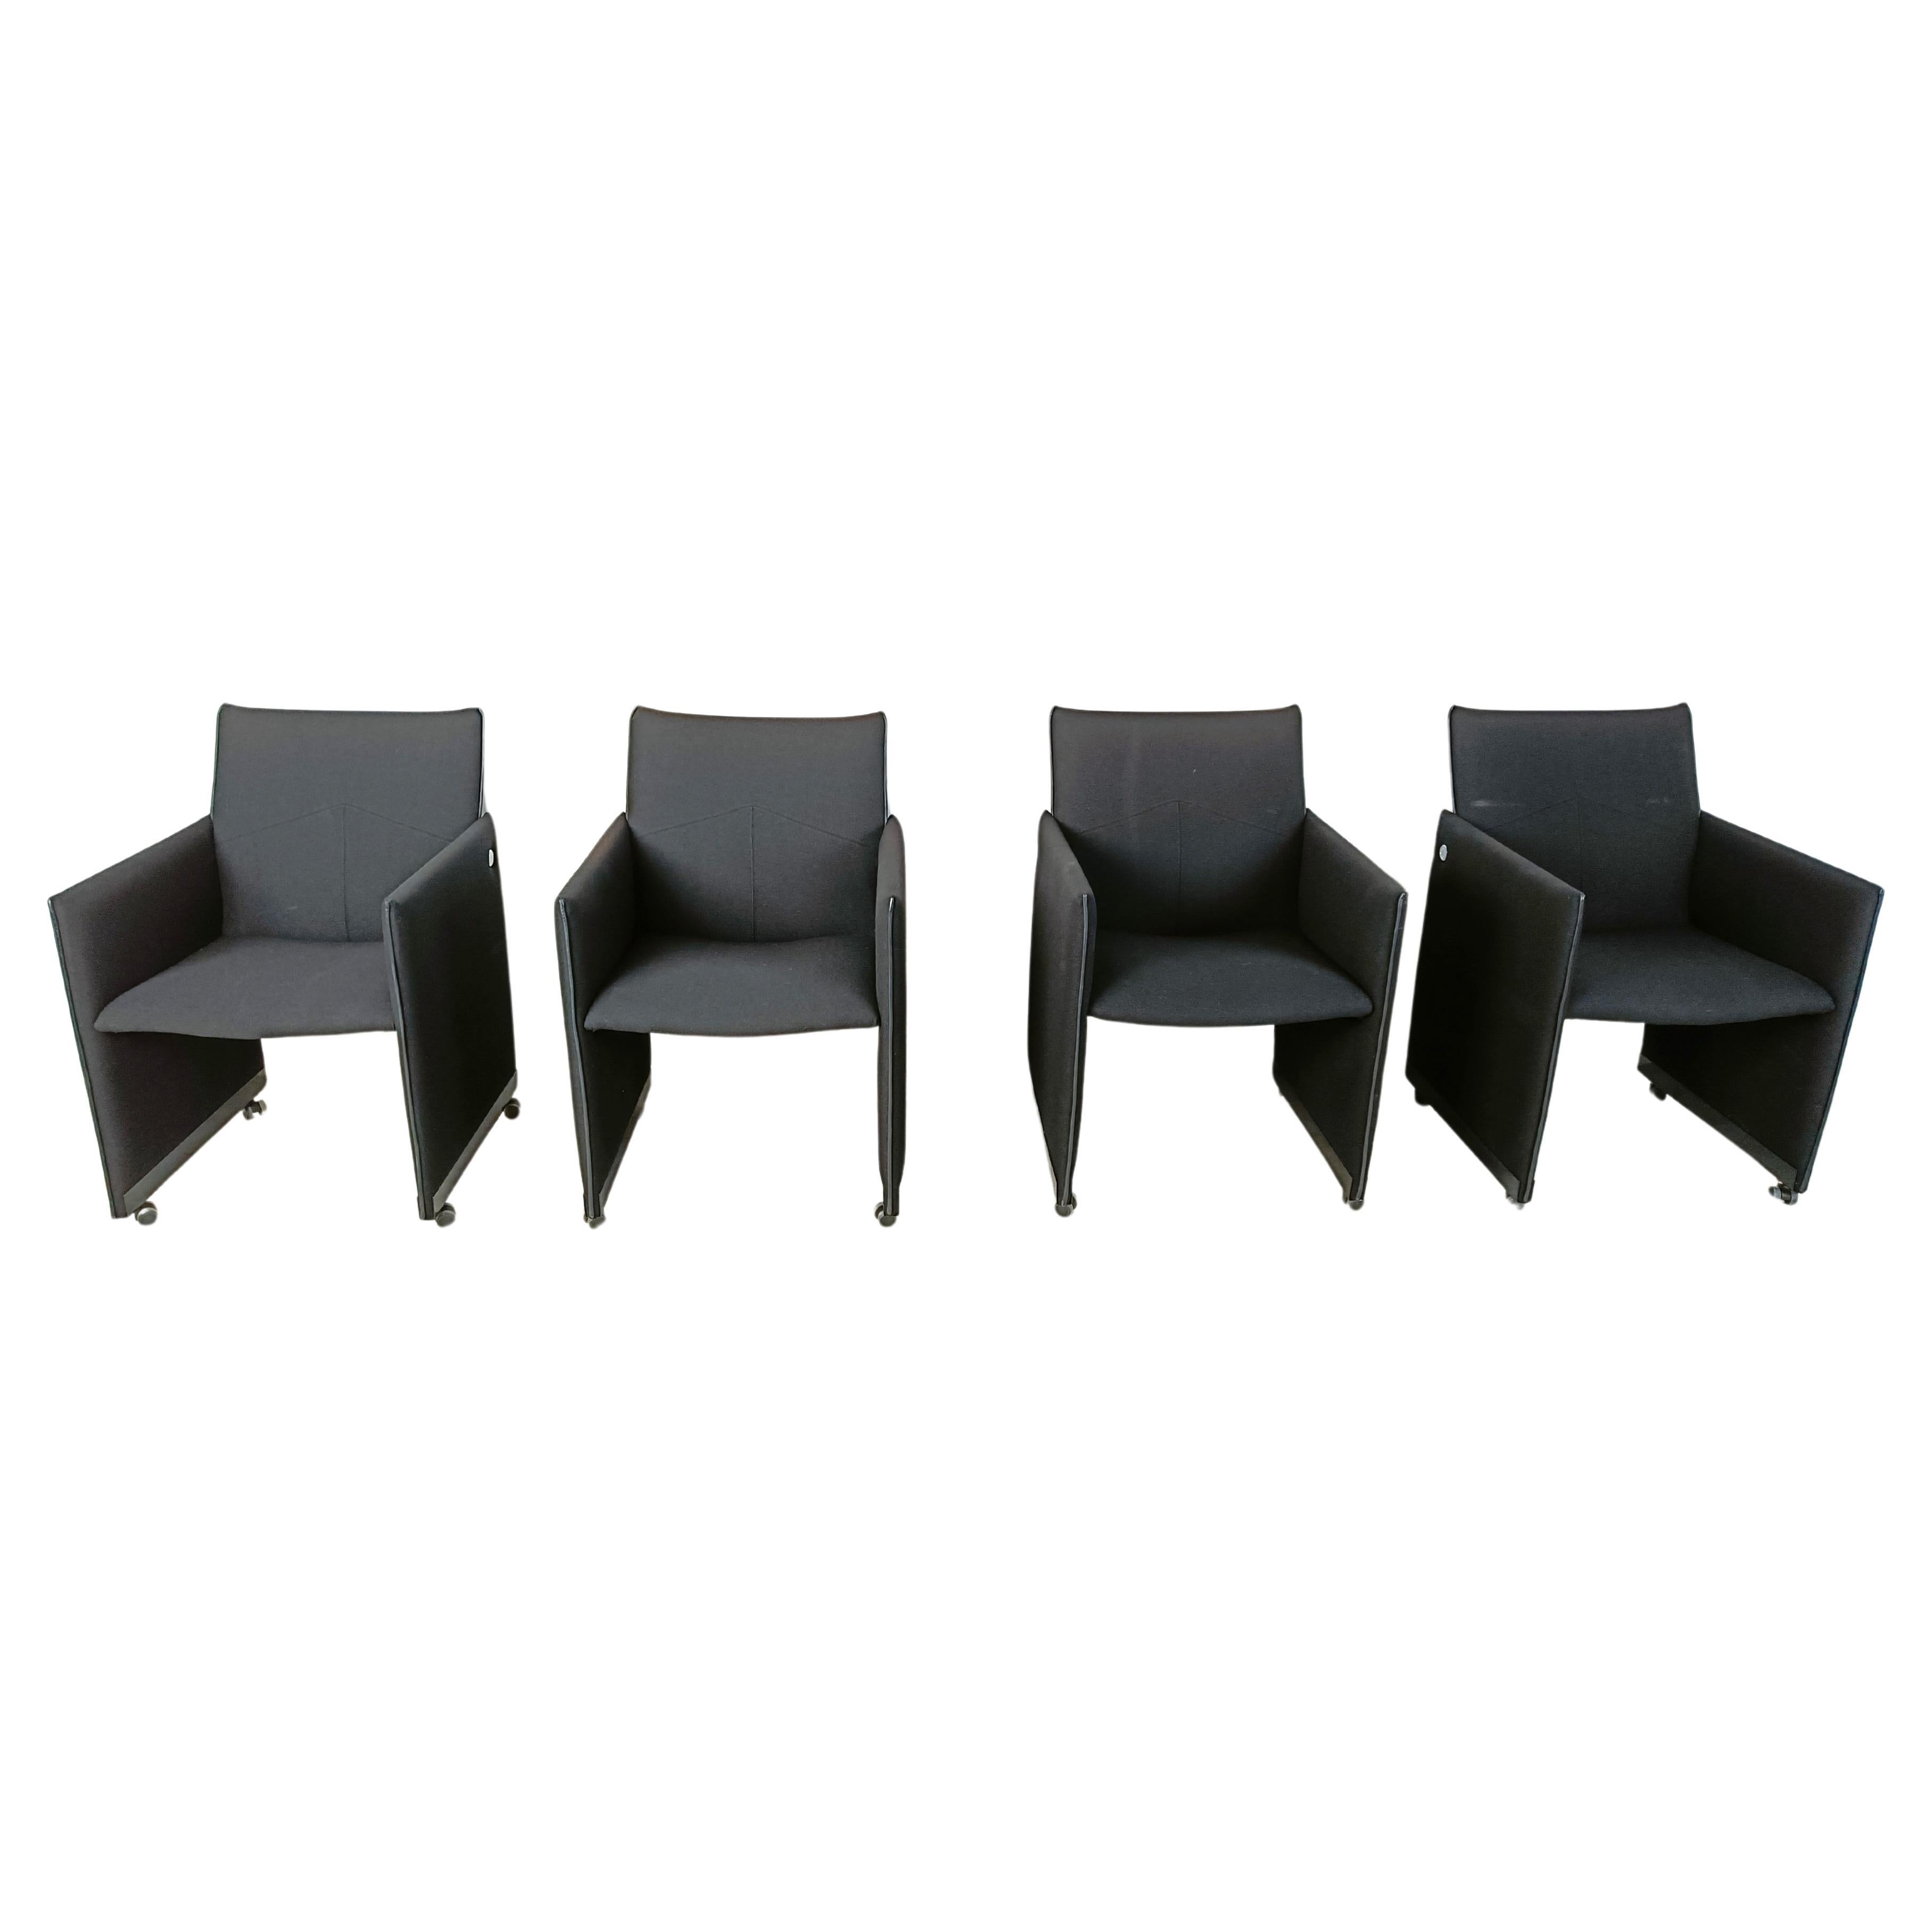 Montana armchairs by Geoffrey Harcourt for Artifort, 1990s - set of 4